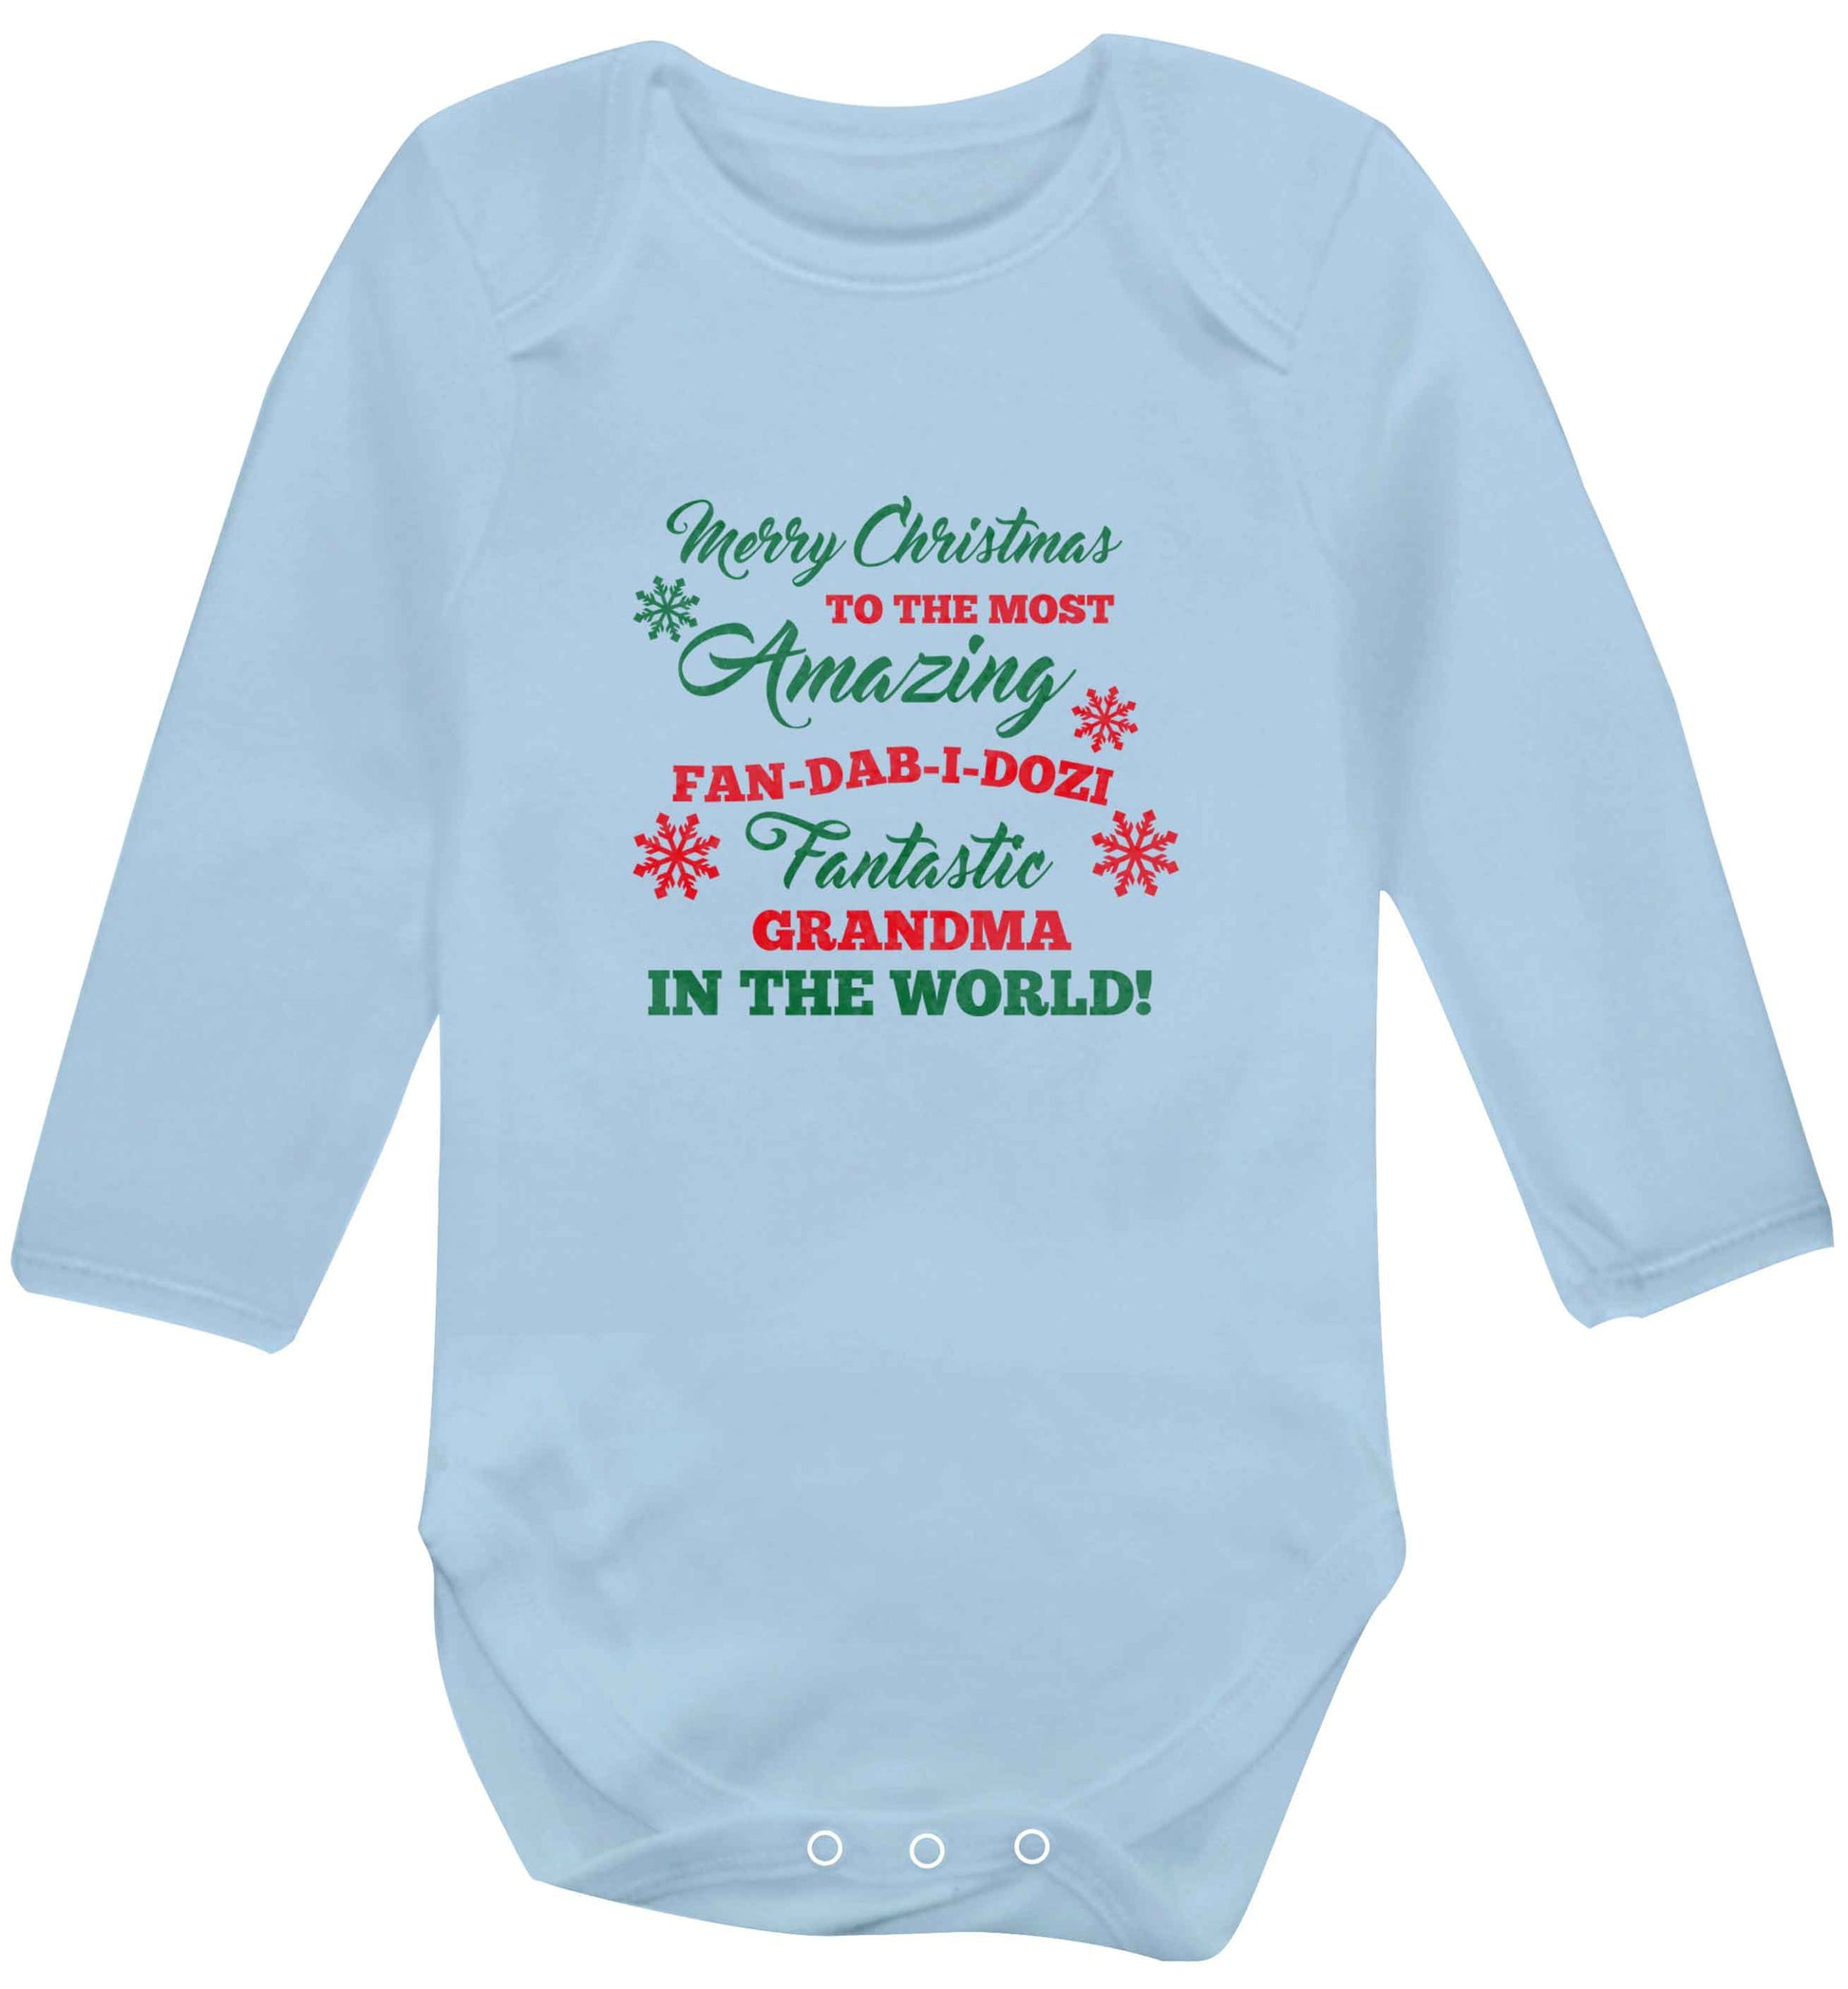 Merry Christmas to the most amazing fan-dab-i-dozi fantasic Grandma in the world baby vest long sleeved pale blue 6-12 months